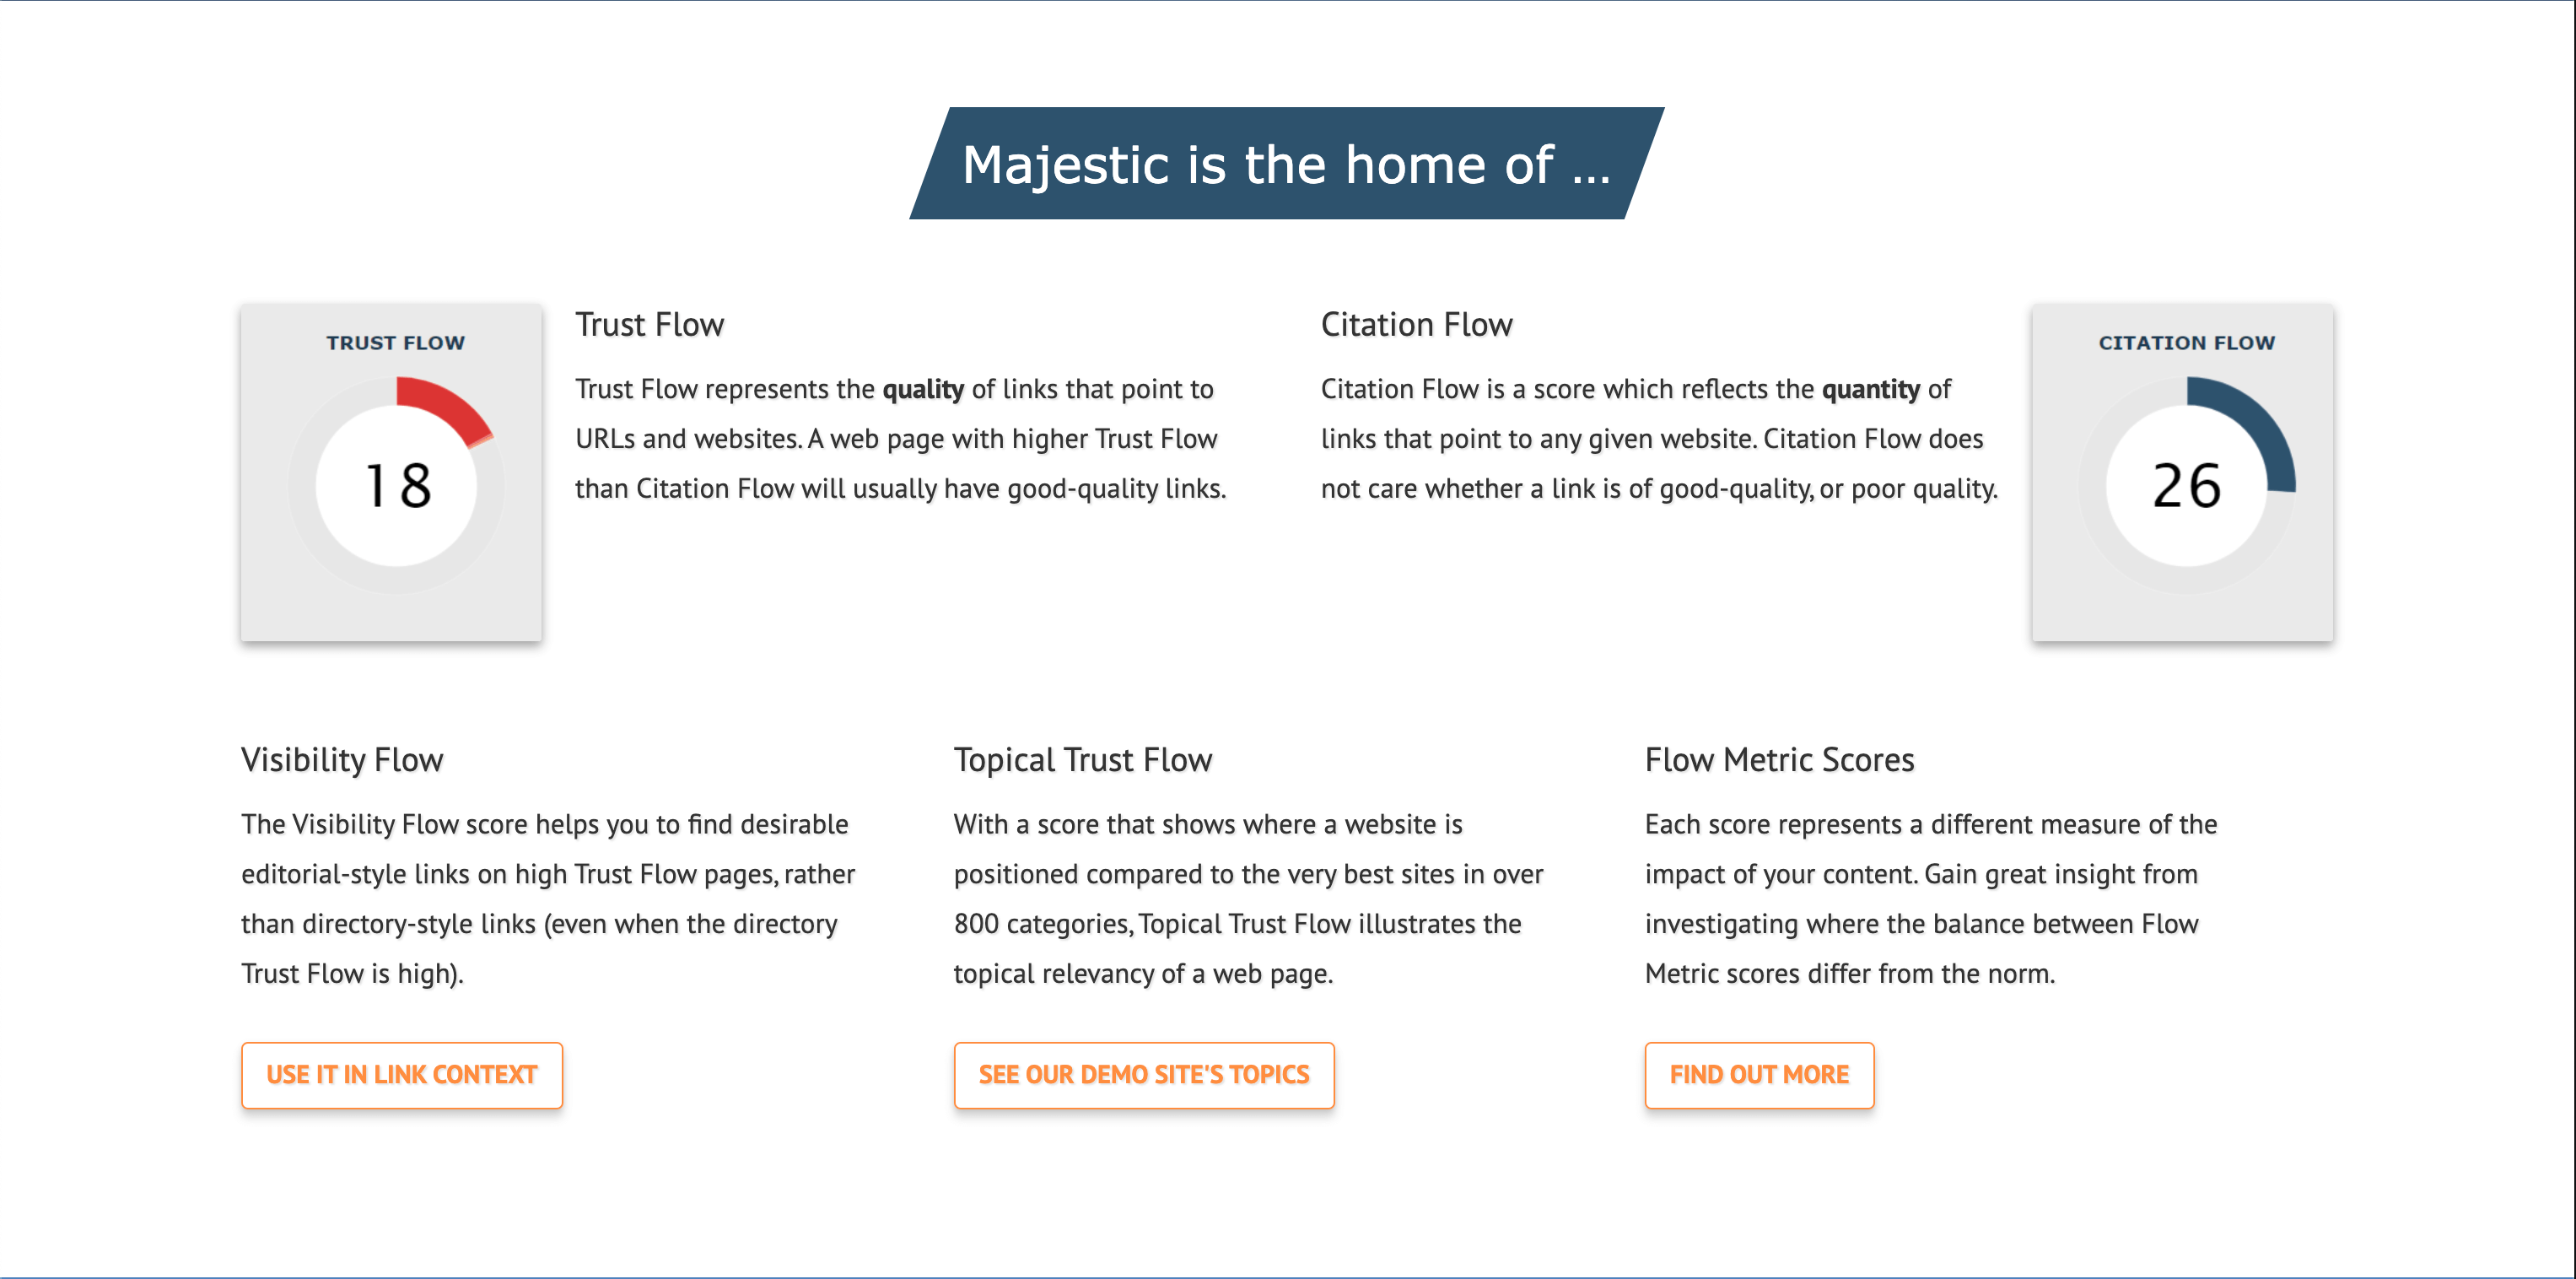 A screenshot from Majestic's page explaining Trust Flow